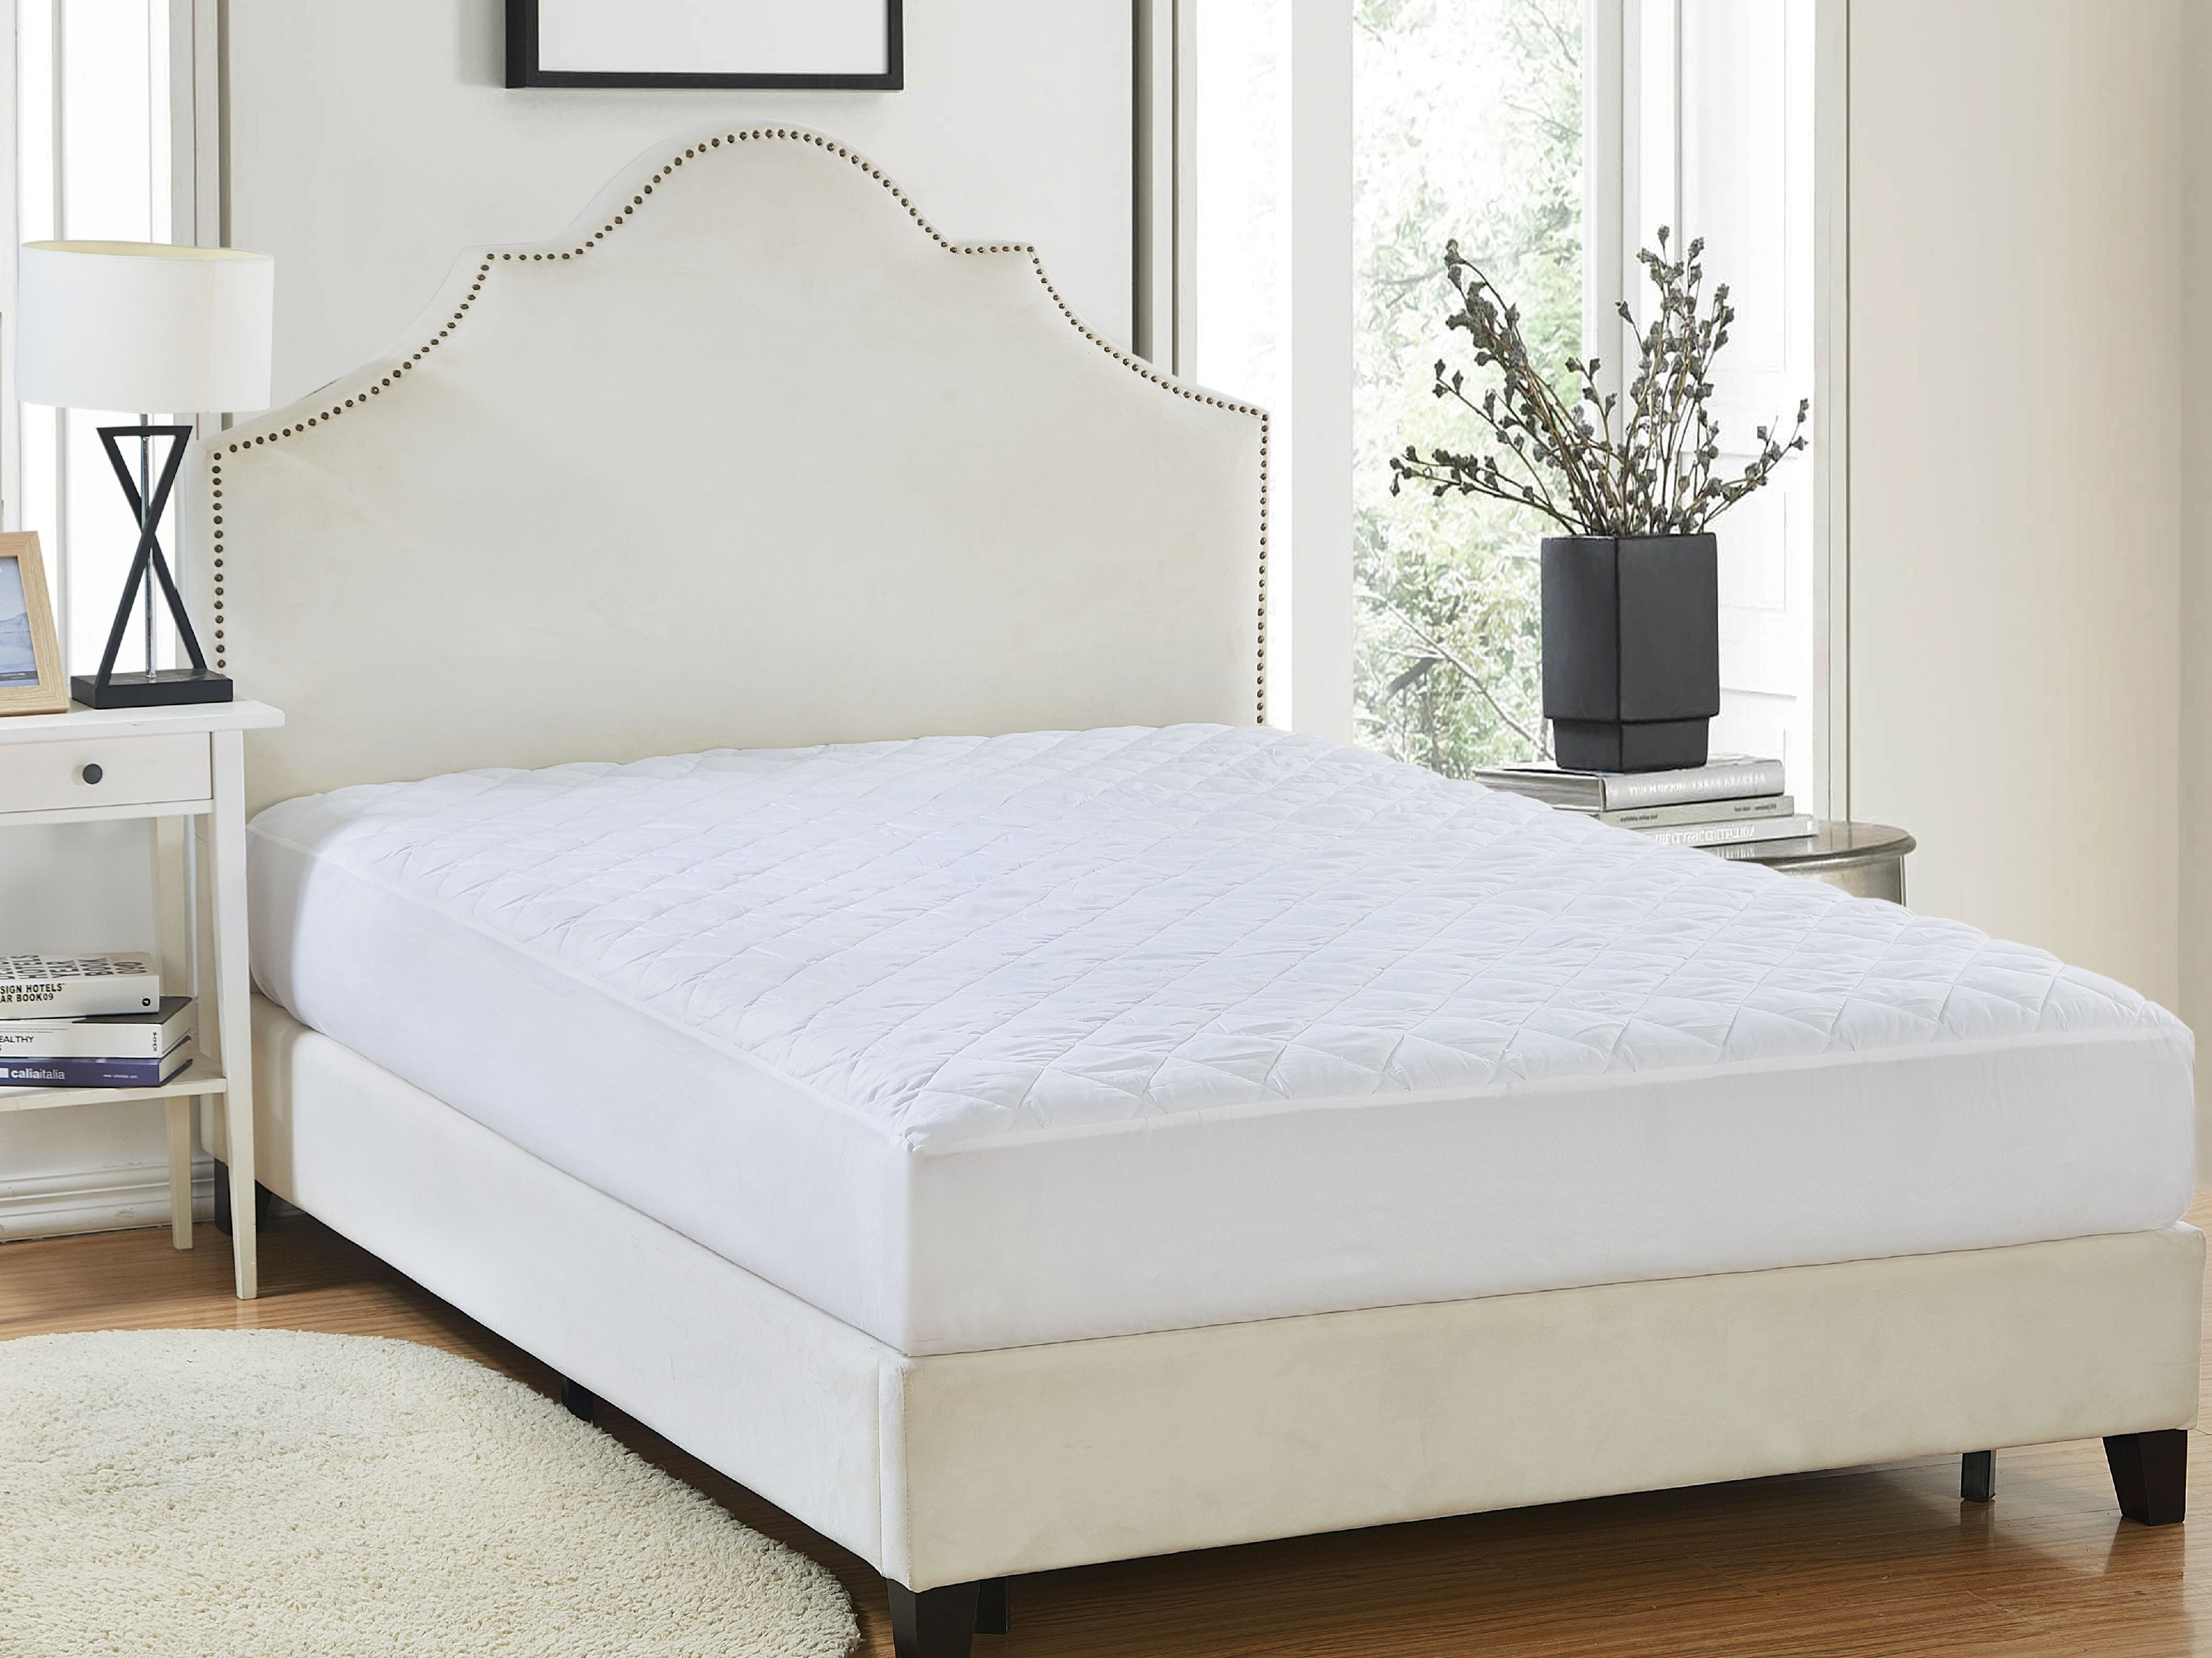 mattress pad for queen bed at walmart